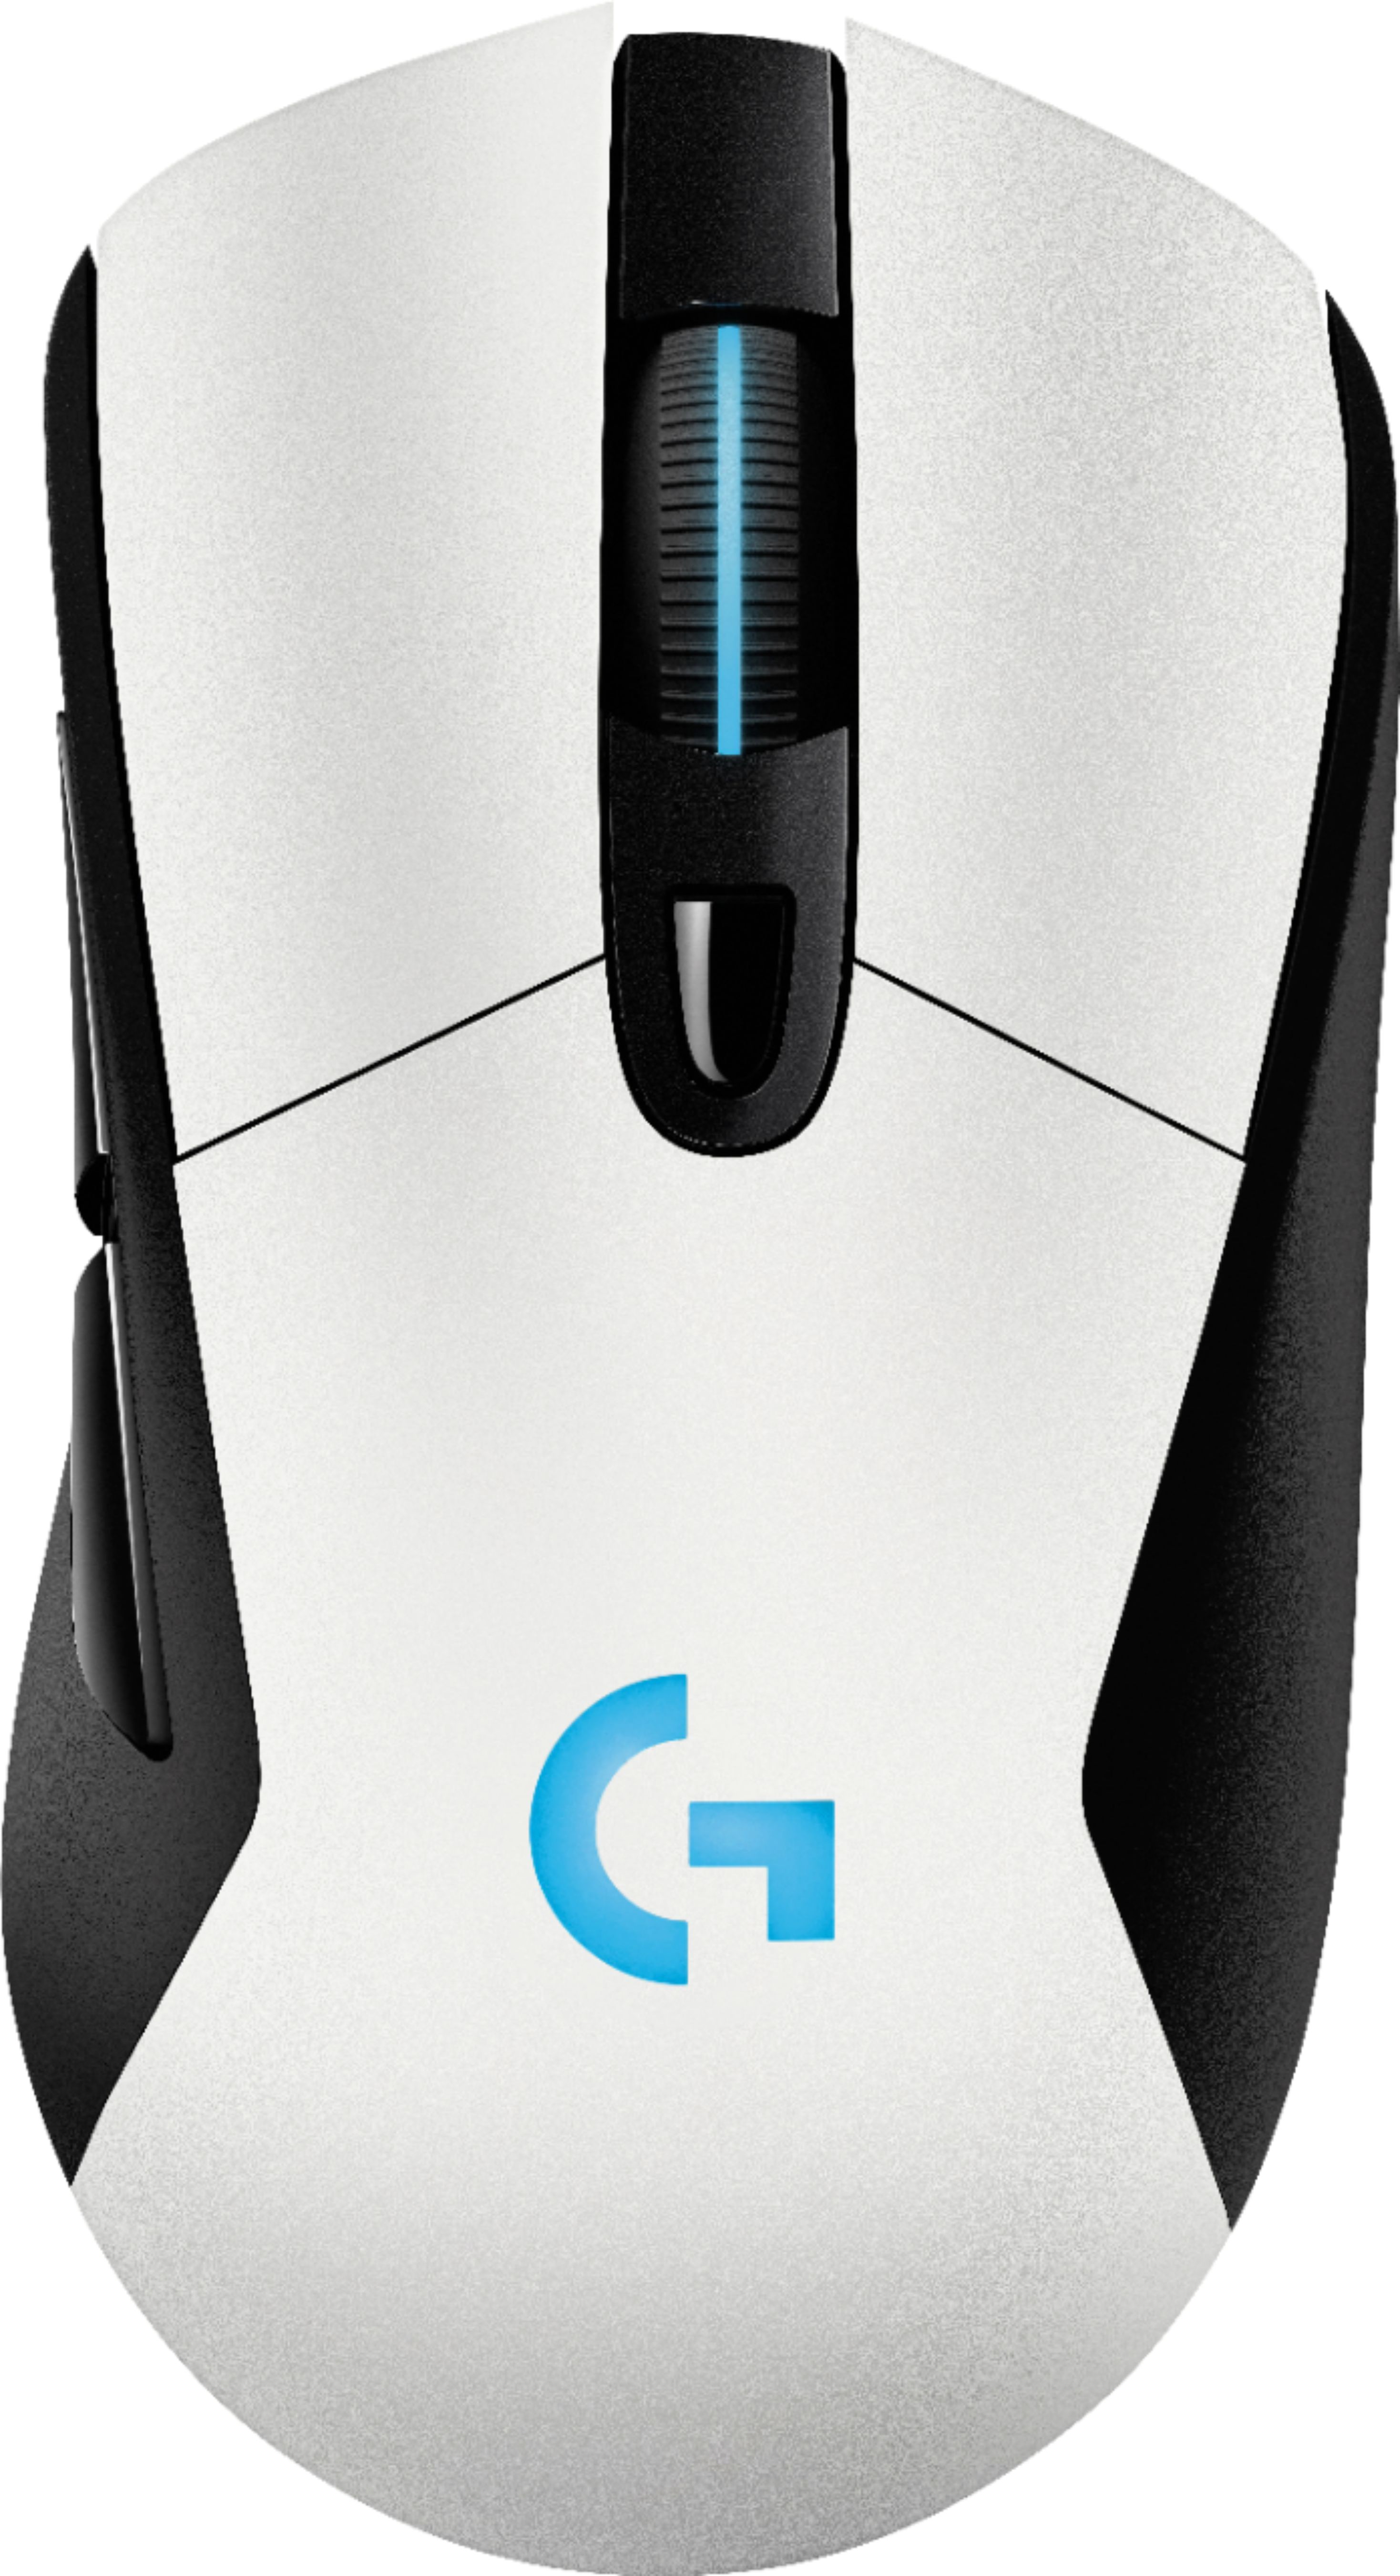 Best Buy: Logitech G703 Wireless Optical Gaming Mouse with RGB